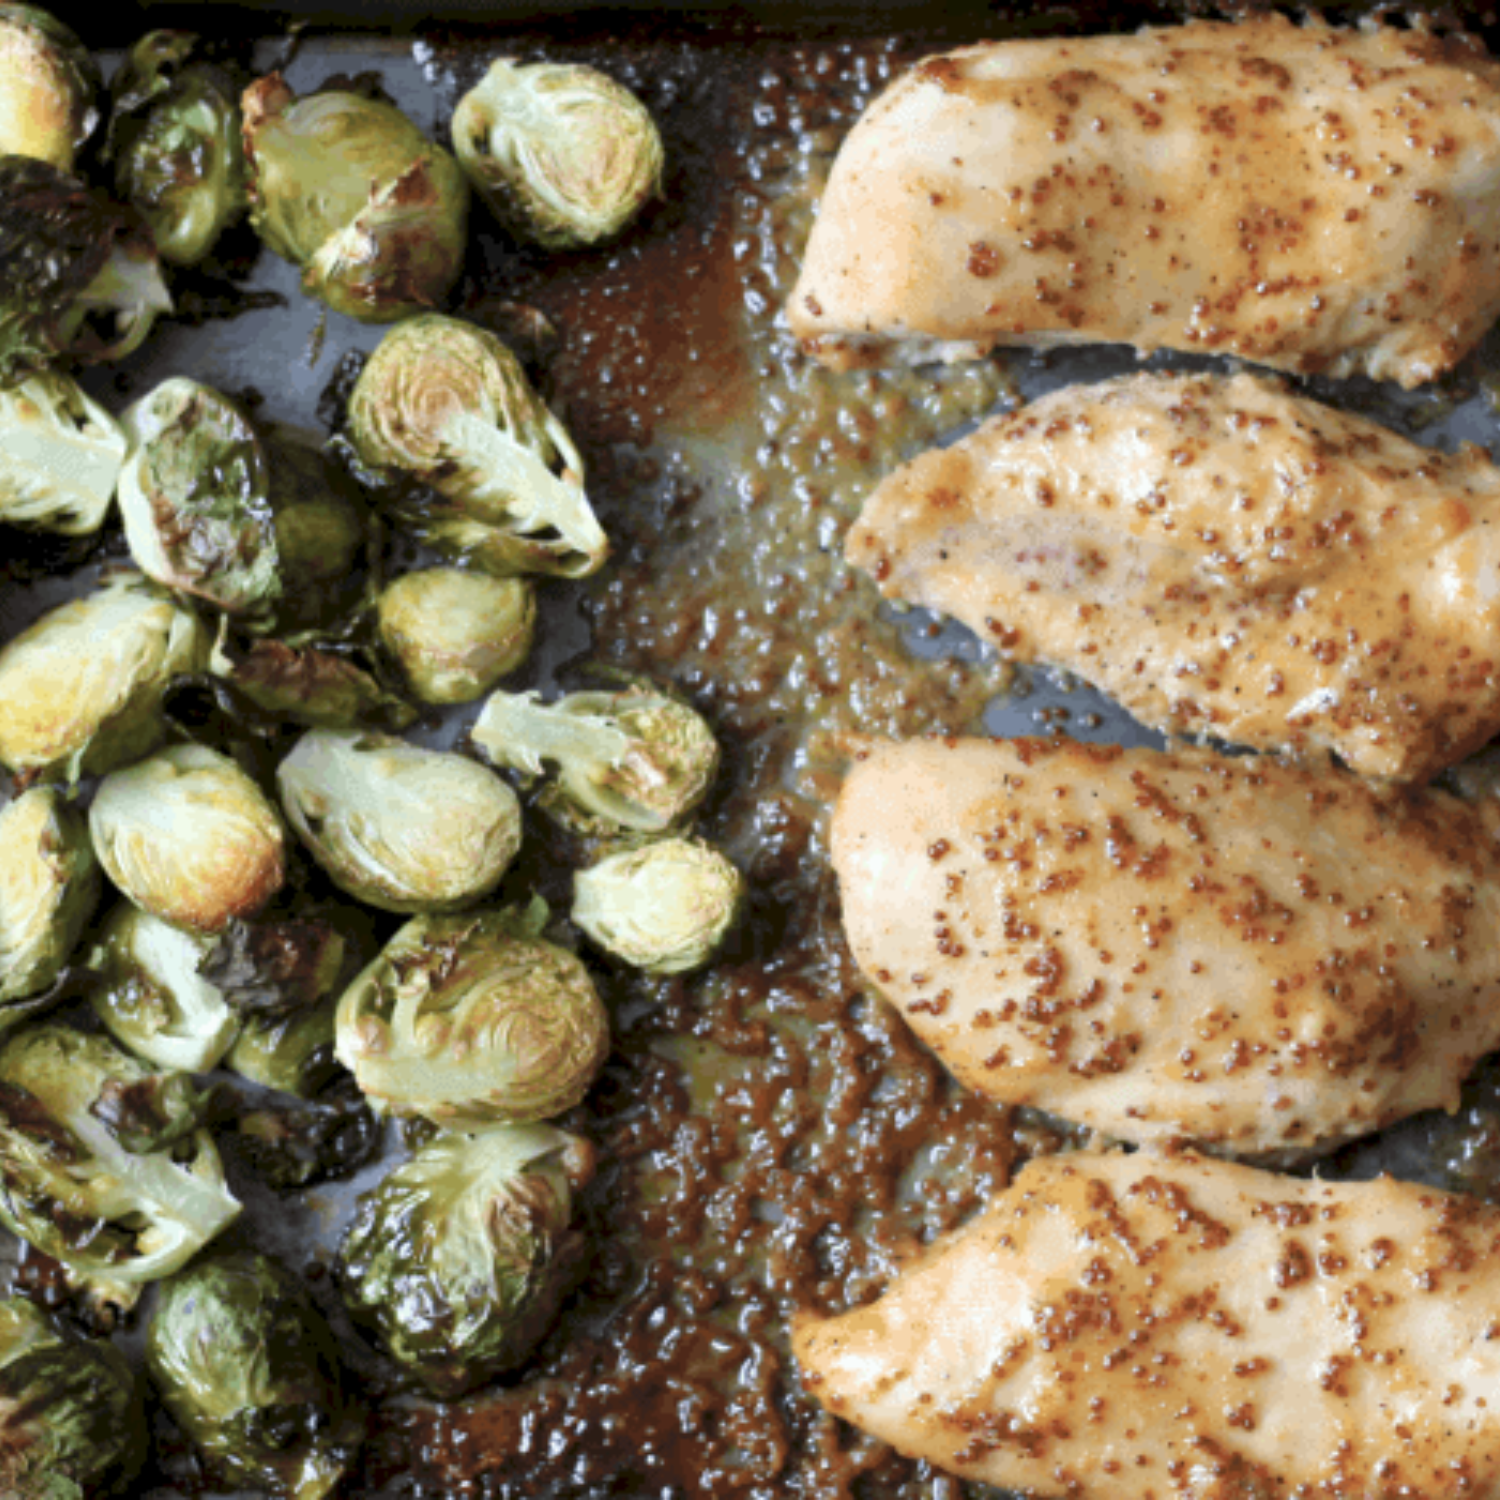 A baking sheet with baked chicken breast on one side and roasted brussel sprouts on the other side all covered in a honey mustard sauce